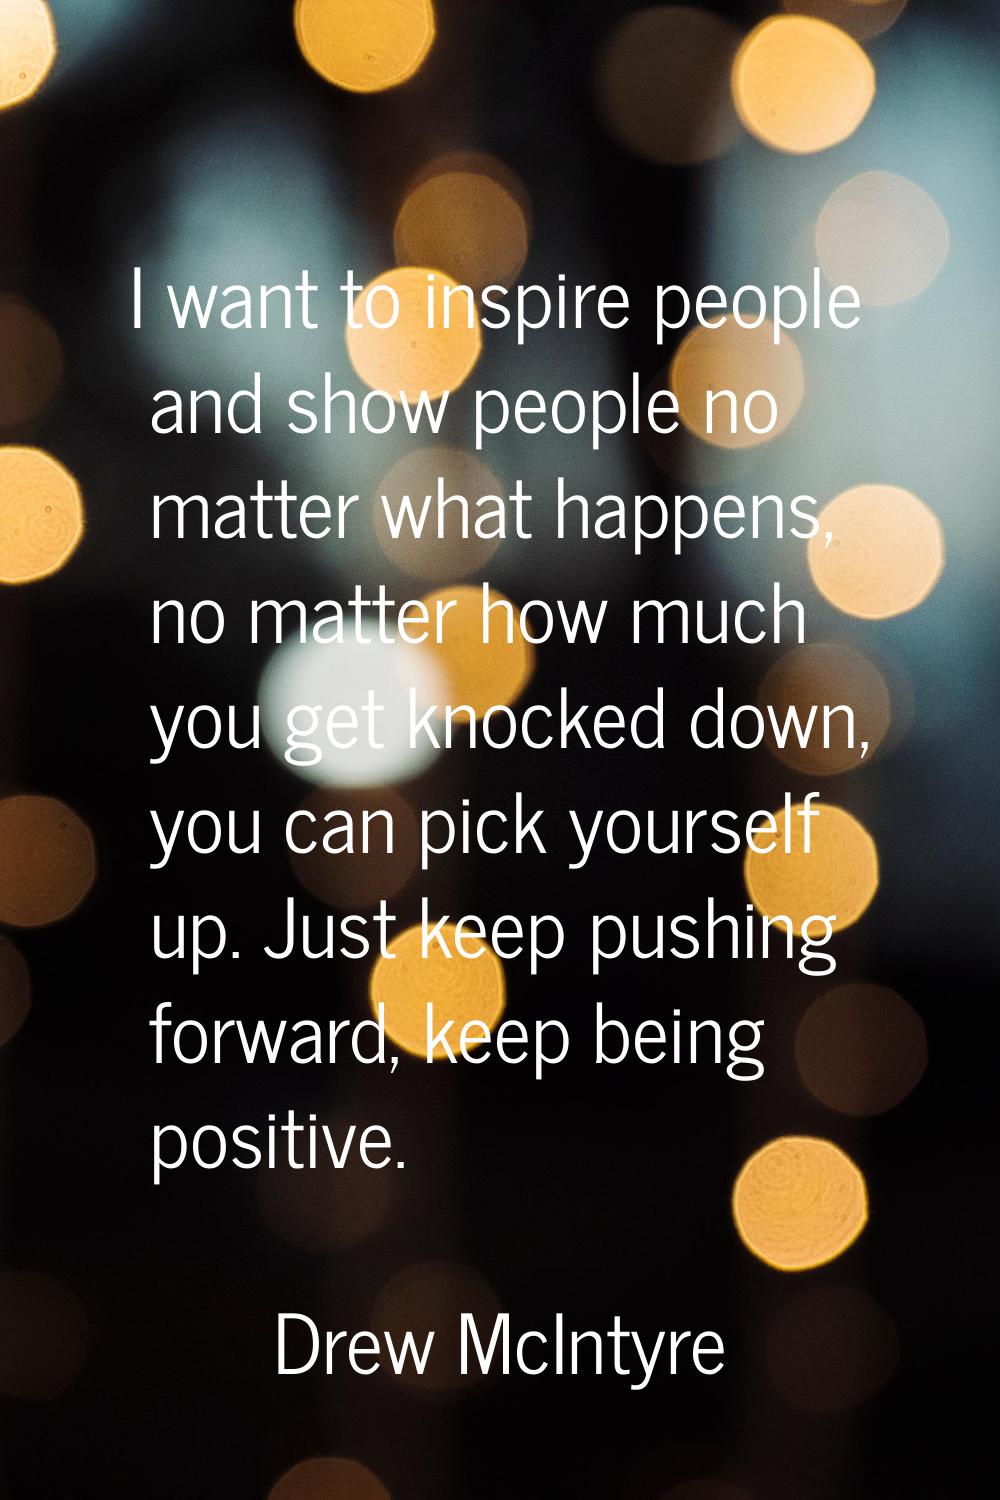 I want to inspire people and show people no matter what happens, no matter how much you get knocked